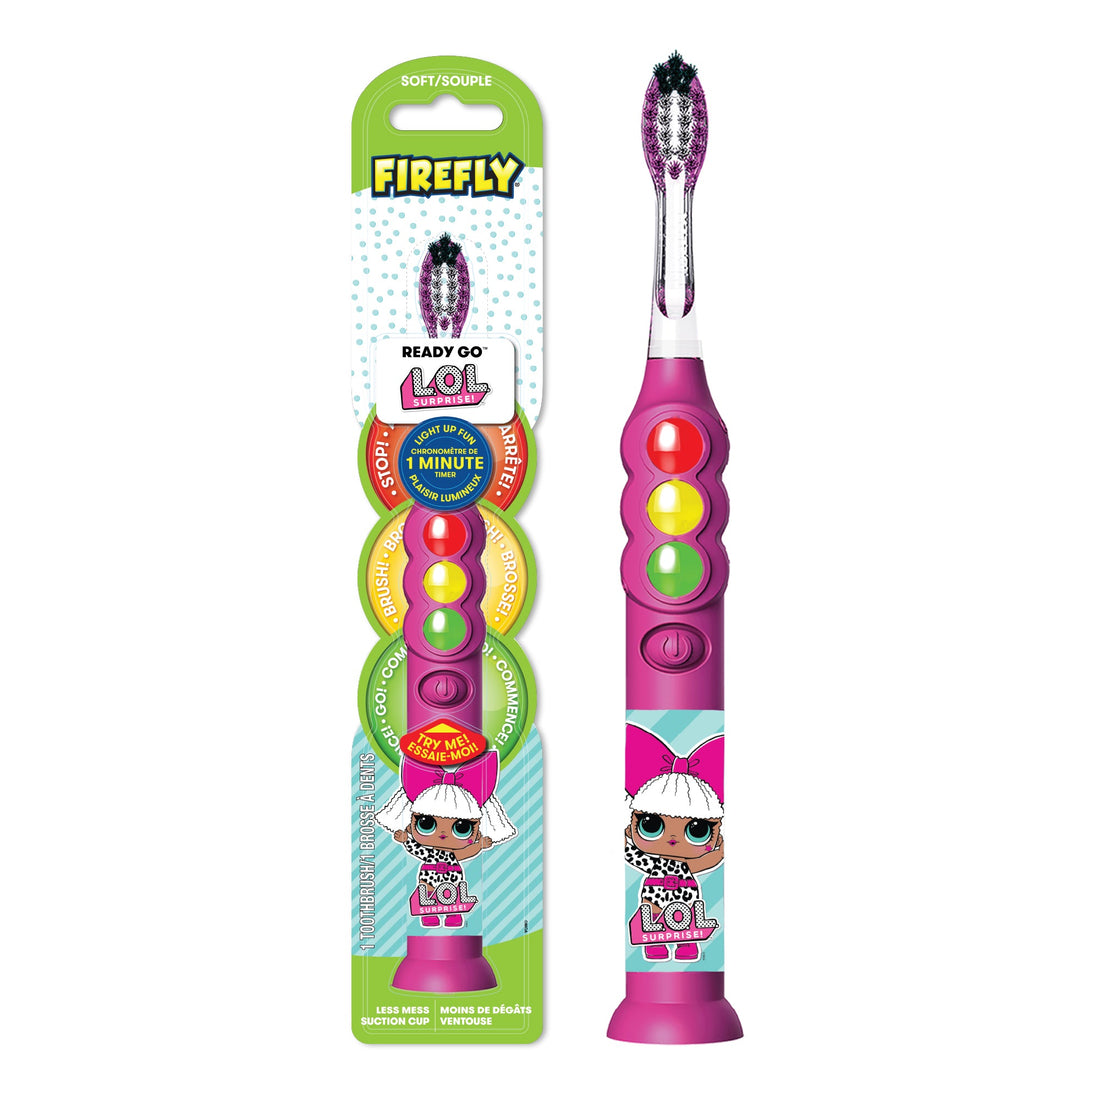 Firefly Ready Go L.O.L. SURPRISE! Light Up Timer Toothbrush, Pink